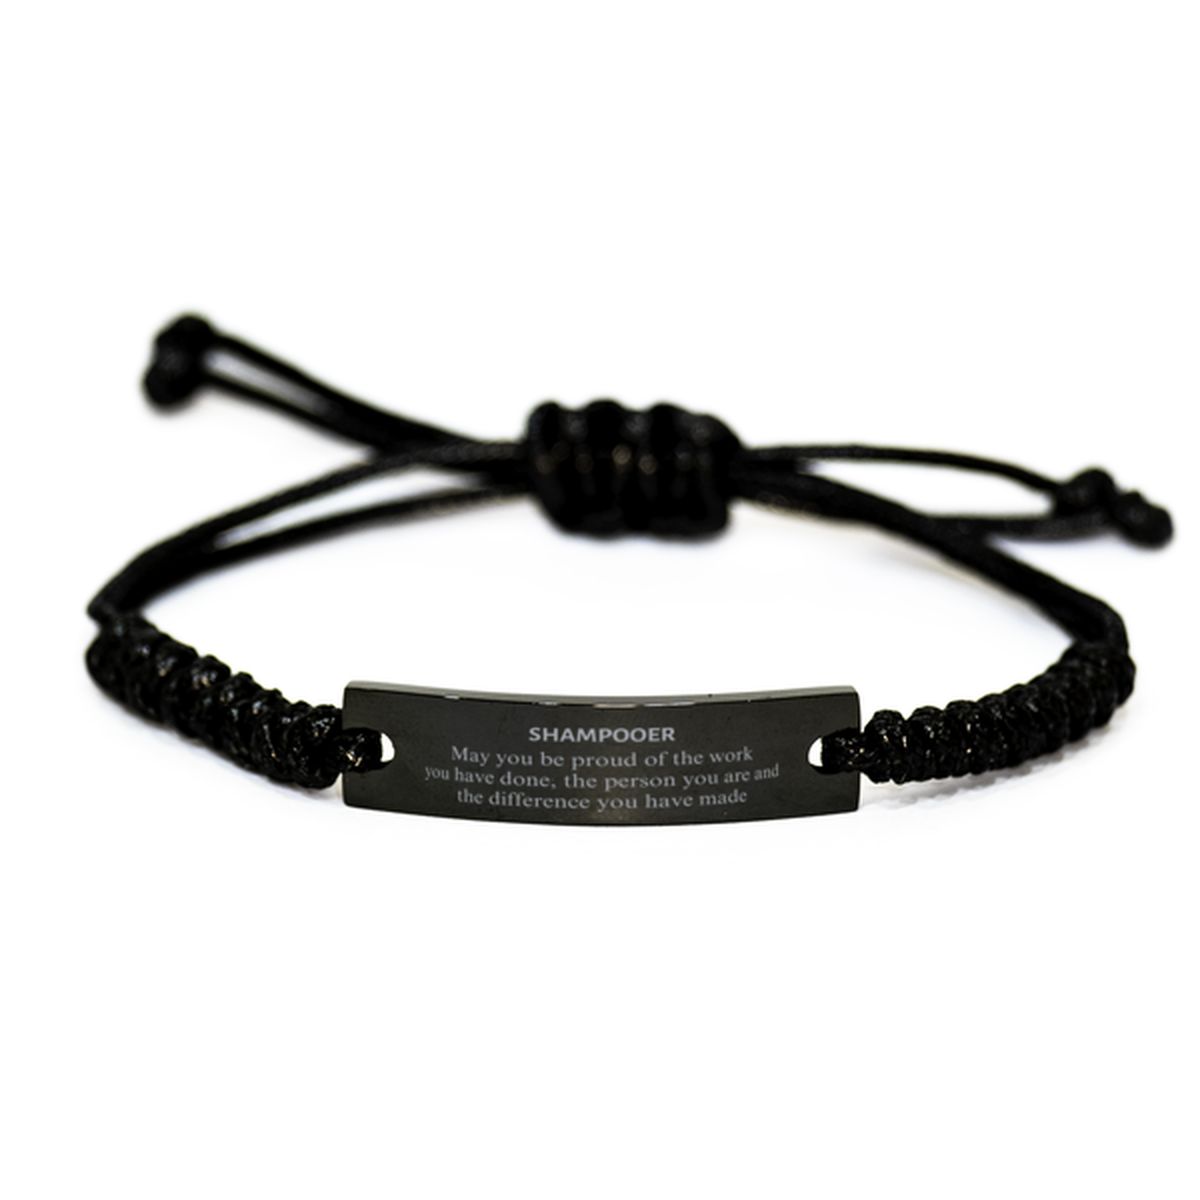 Shampooer May you be proud of the work you have done, Retirement Shampooer Black Rope Bracelet for Colleague Appreciation Gifts Amazing for Shampooer